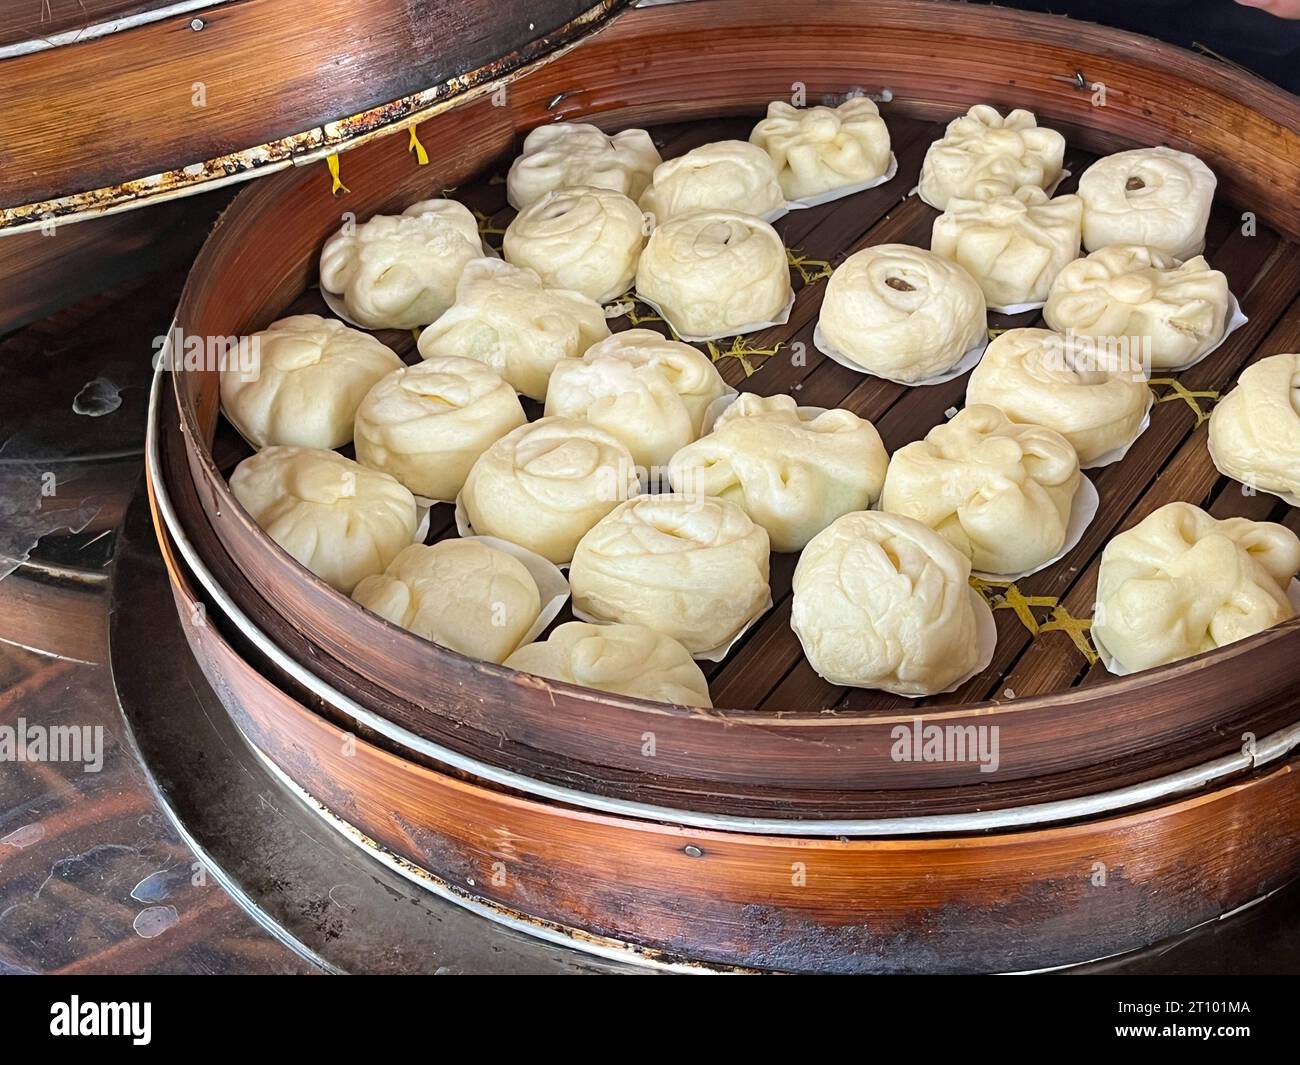 Bakpao, Baozi Steamed bun, pao, dim sum on In a bamboo steamer. a type of yeast-leavened filled bun in various Chinese cuisines. Stock Photo